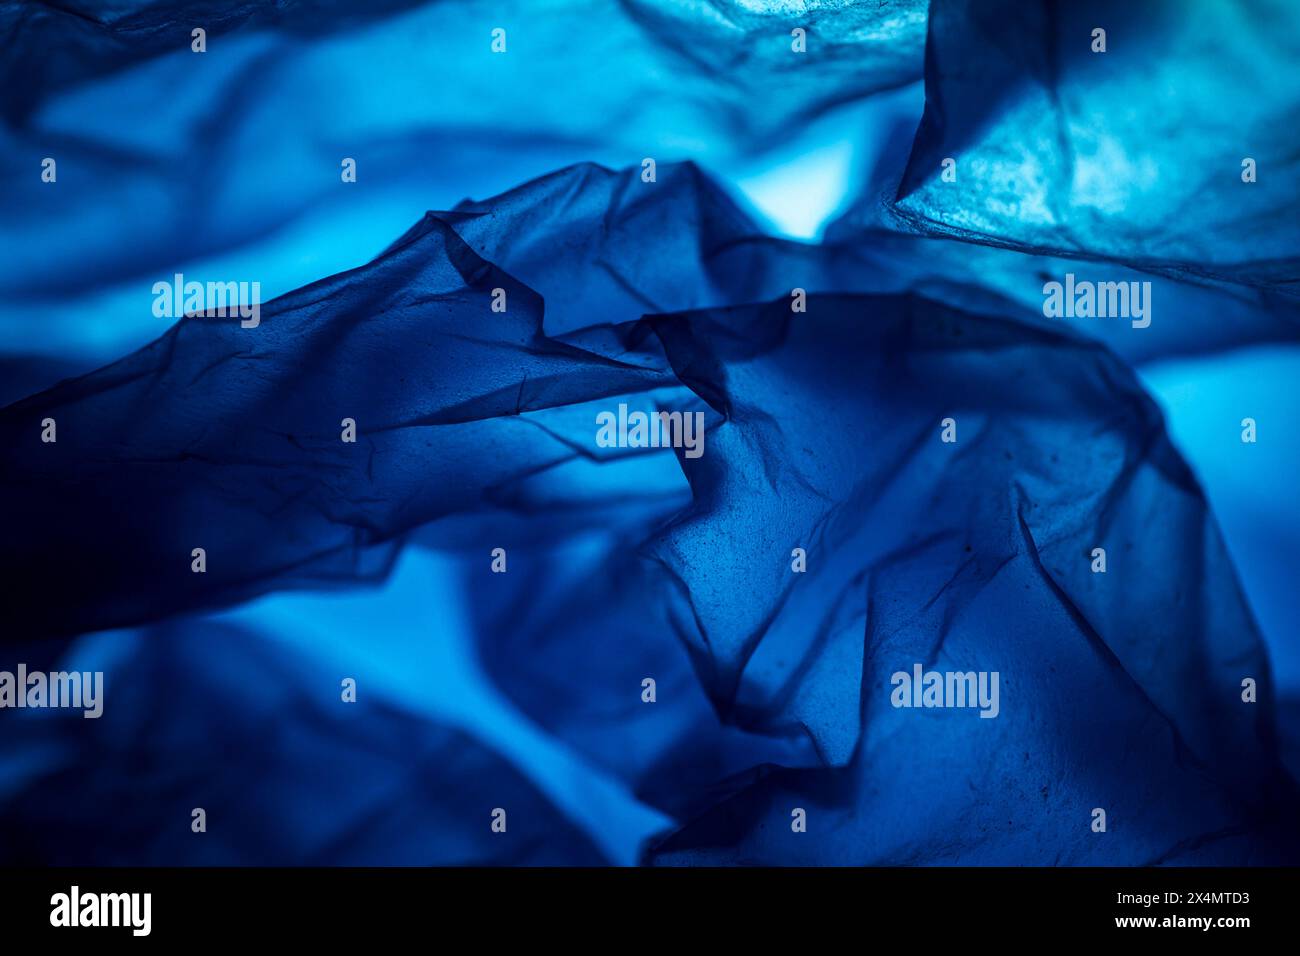 Extreme close up of blue empty plastic bag background. The plastic surface is wrinkly and tattered making abstract pattern. Selective focus, shallow d Stock Photo